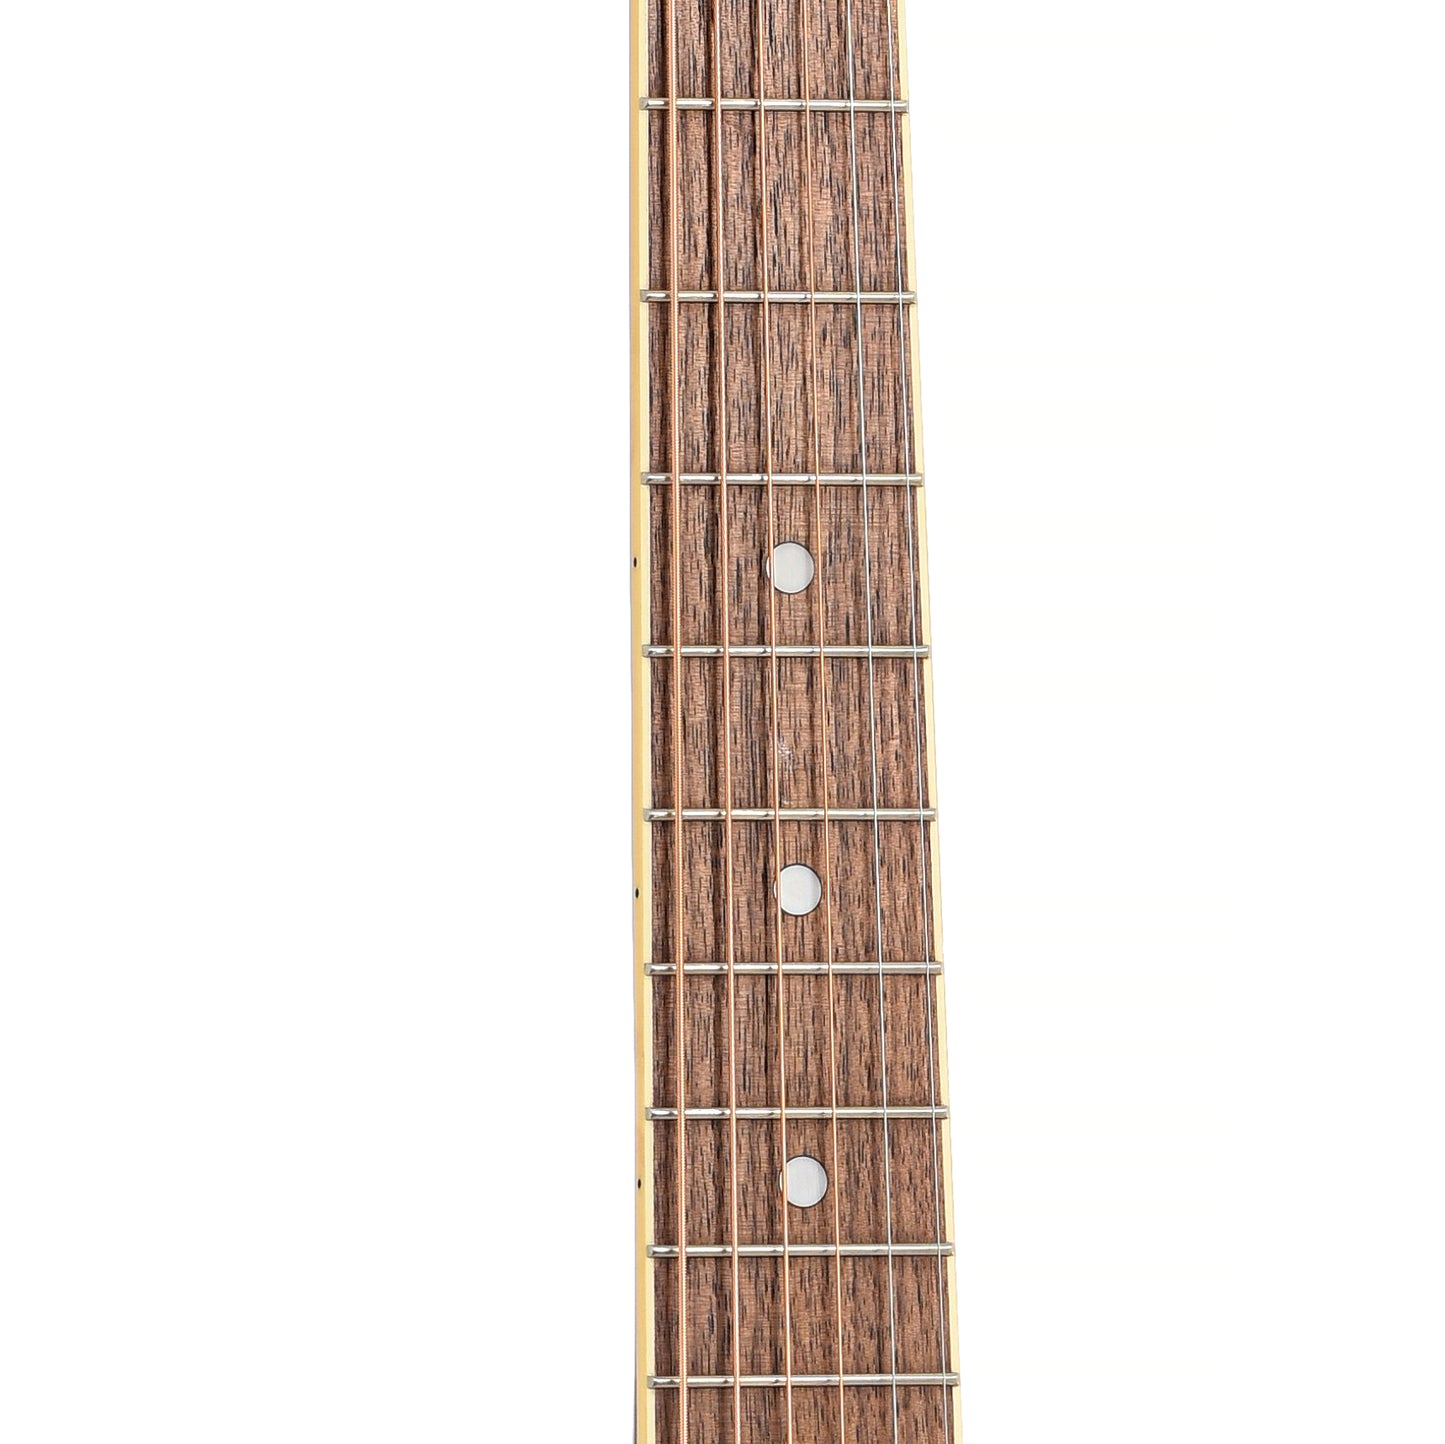 Fretboard of Gretsch Jim Dandy Parlor Acoustic Guitar, Frontier Stain